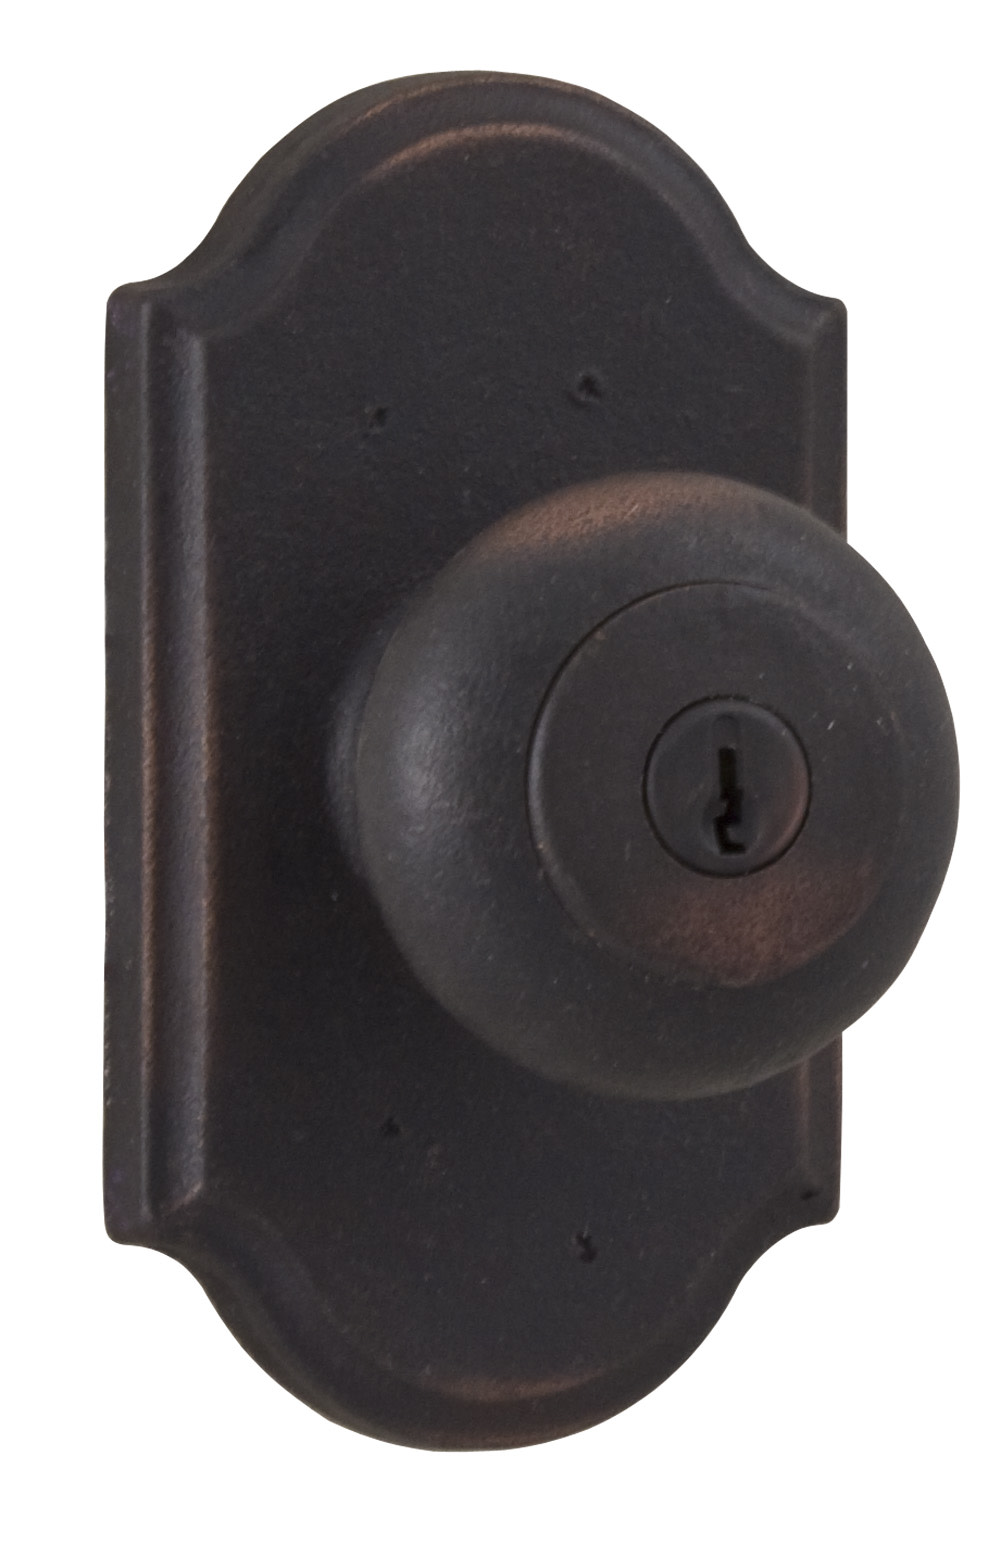 Weslock 07140F1F1SL23 Wexford Premiere Entry Lock with Adjustable Latch and Full Lip Strike Oil Rubbed Bronze Finish - image 1 of 7